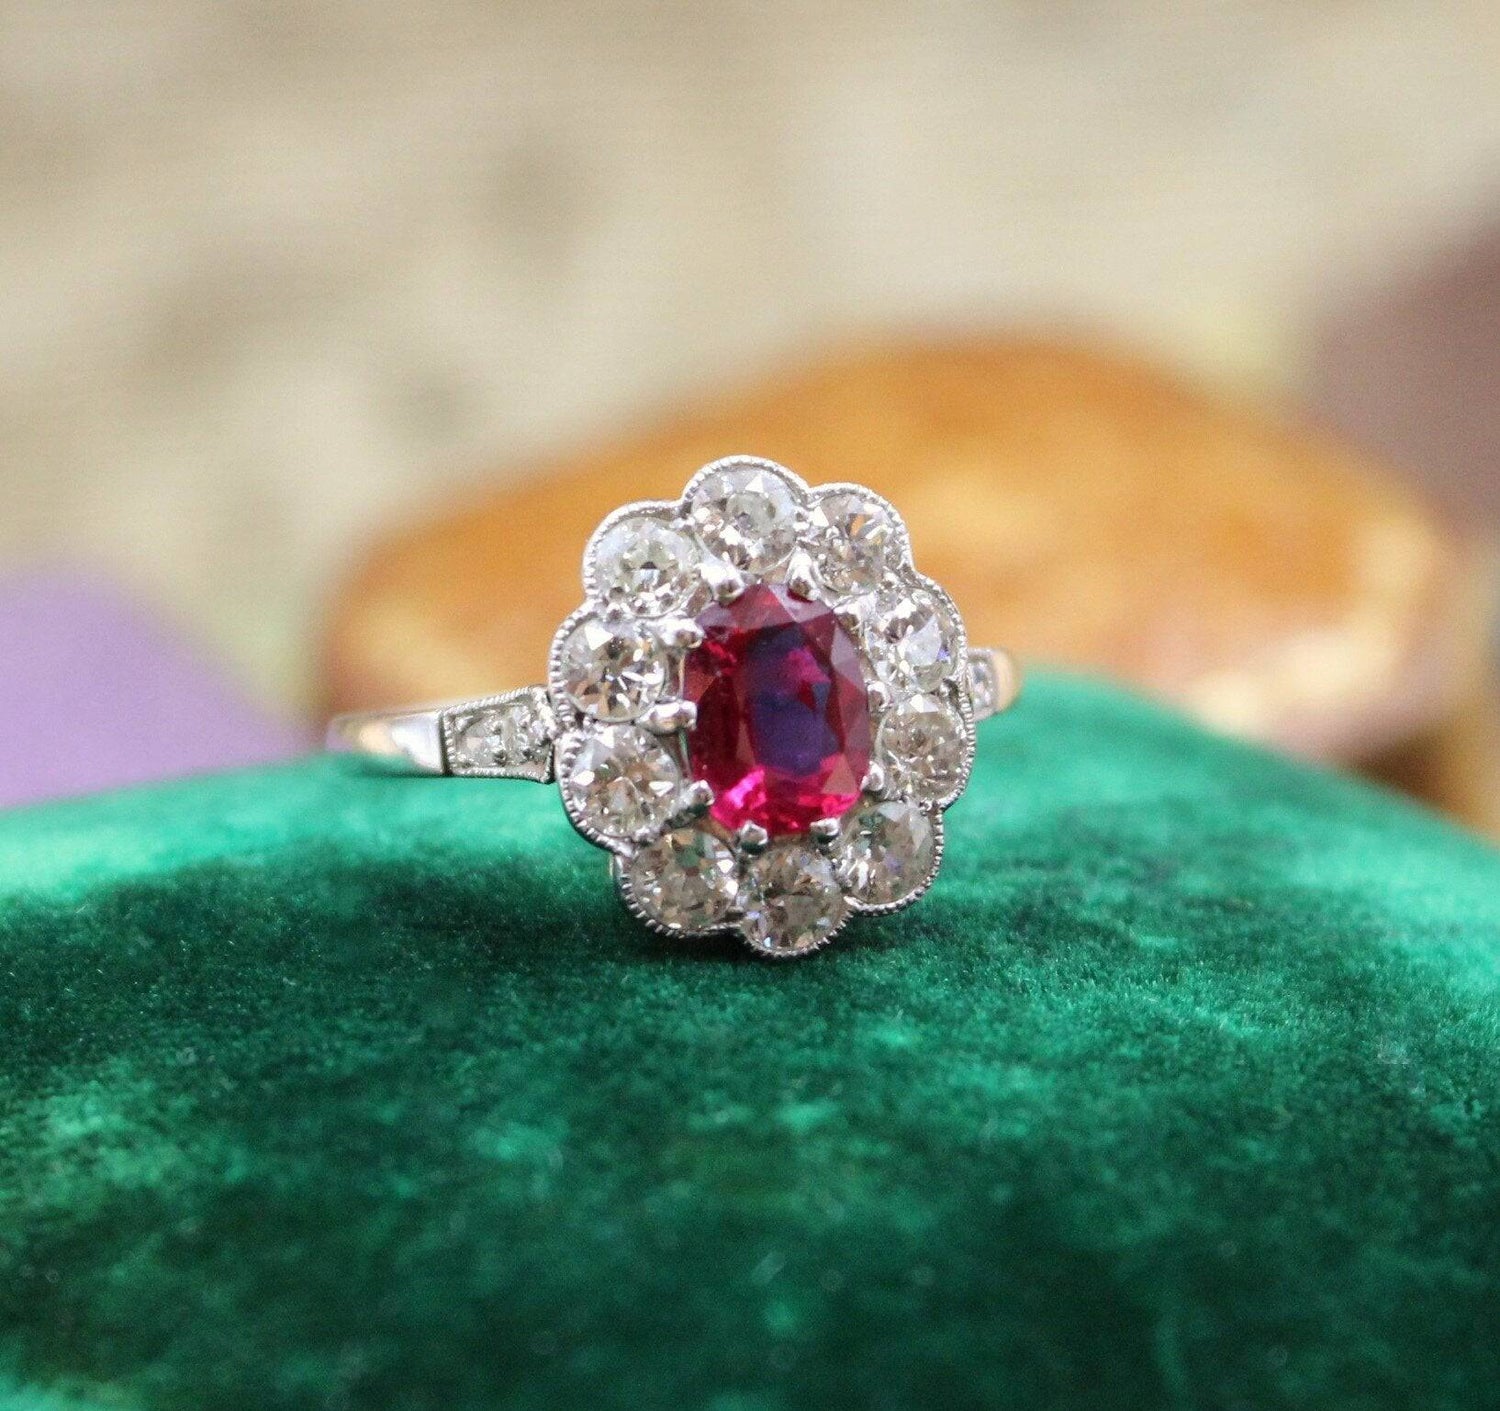 A very fine Siamese Ruby & Diamond Cluster Ring mounted in Platinum, English, Circa 1930 - Robin Haydock Antiques